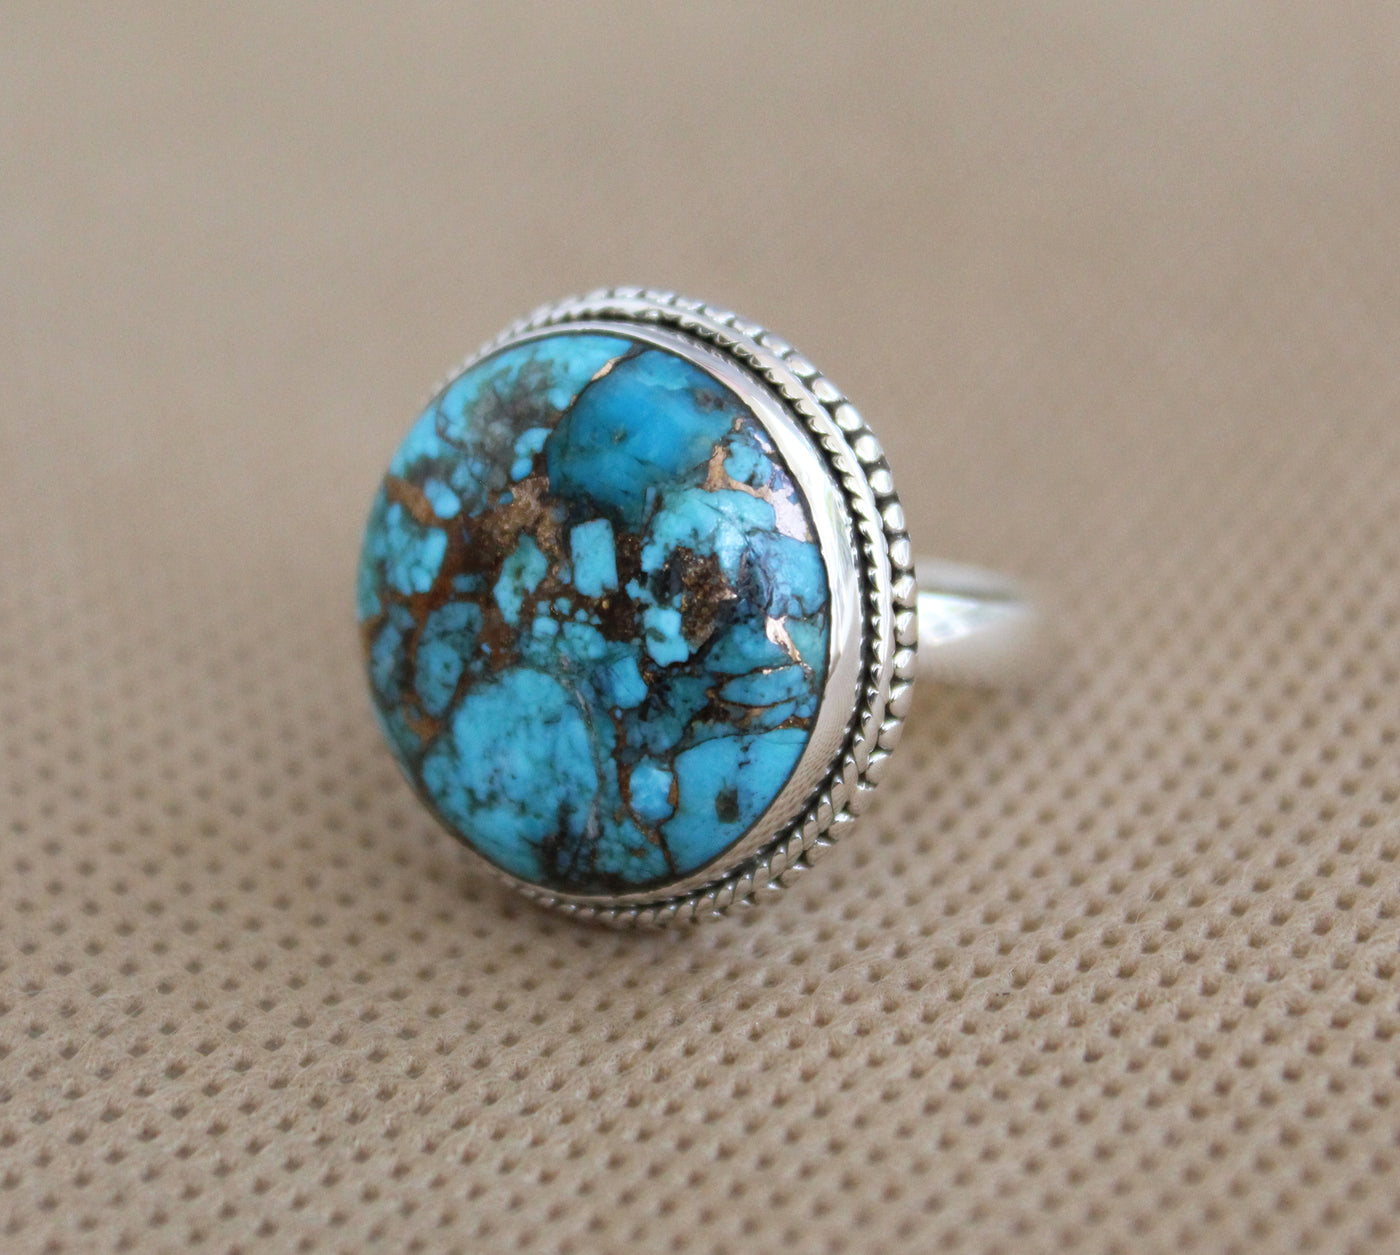 Copper Turquoise Round Ring, Jewelry Handmade, December Birthstone , Bohemian Jewelry, Statement Ring, Large Silver Rings